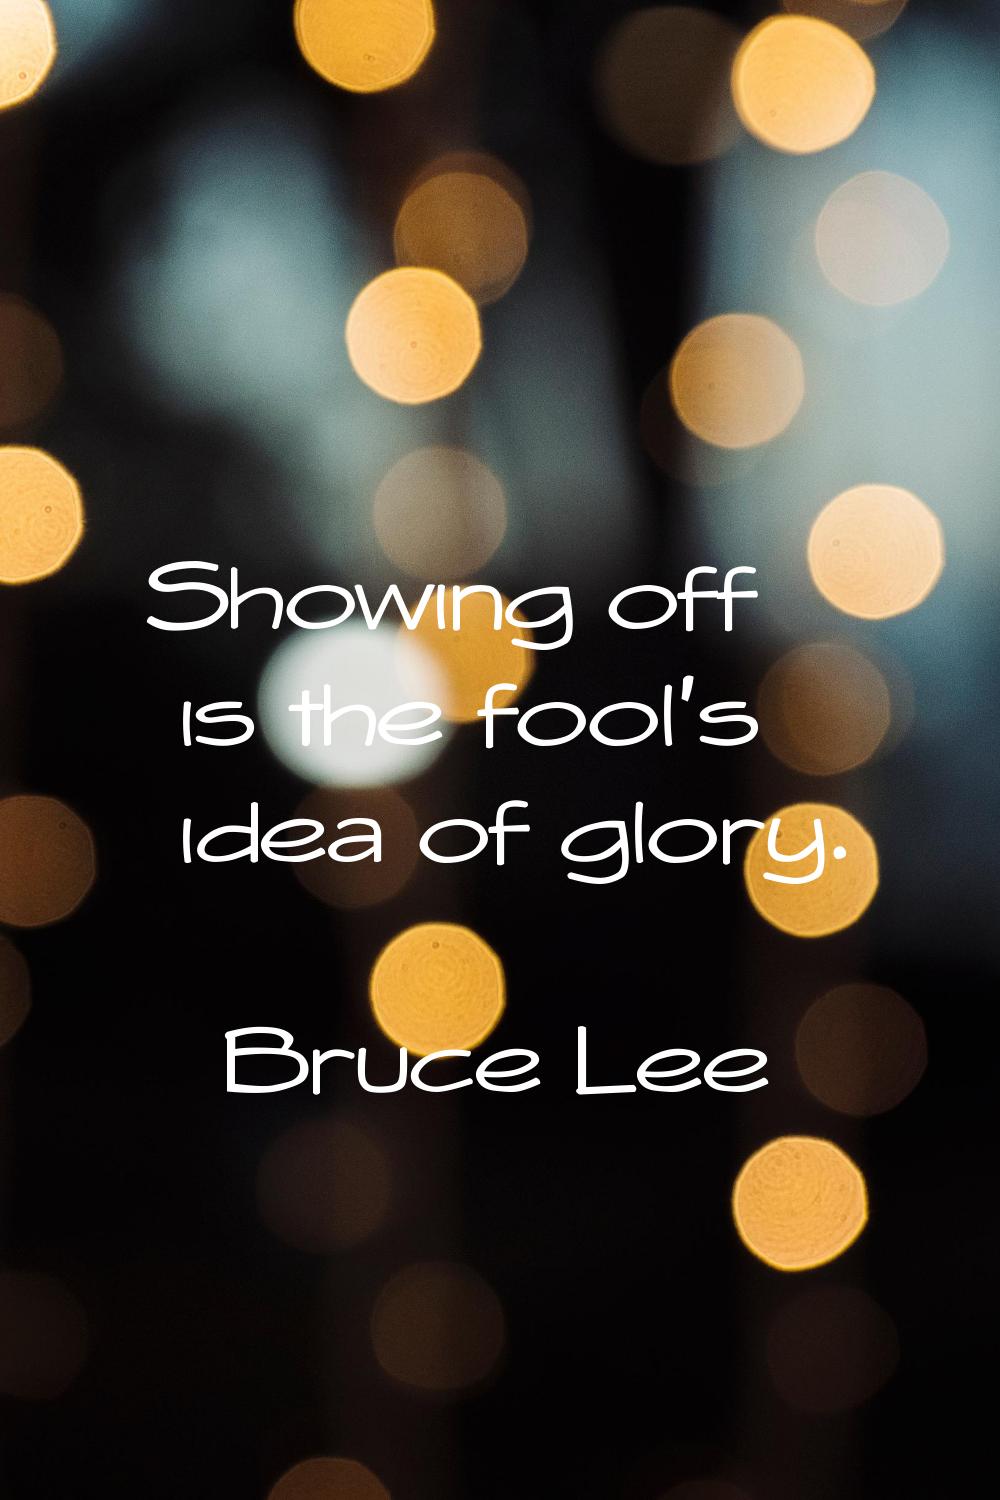 Showing off is the fool's idea of glory.